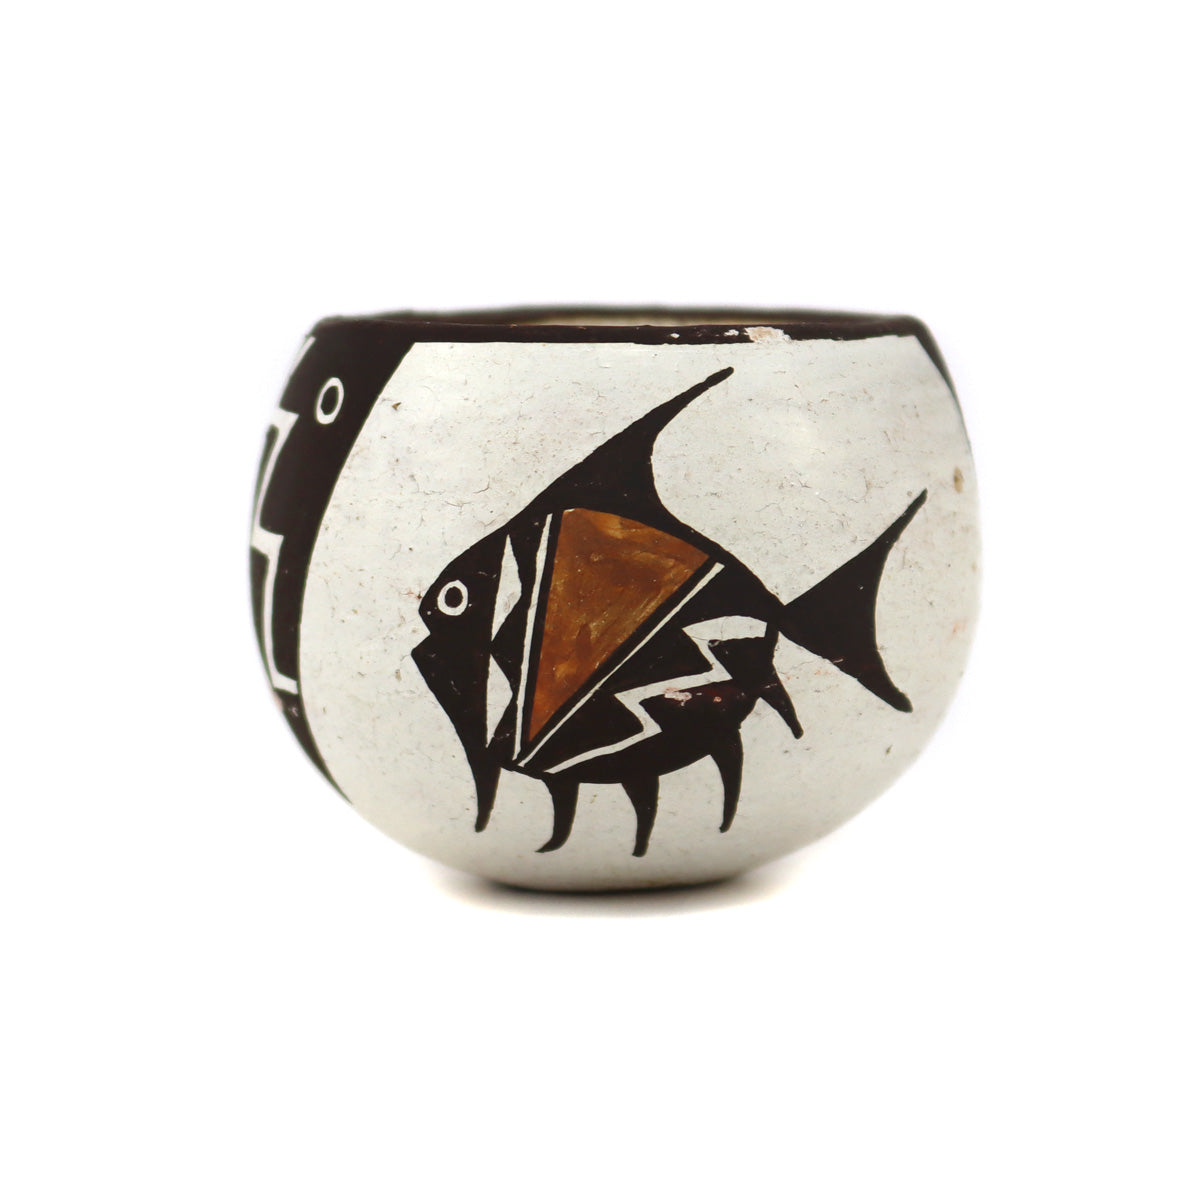 Emma Lewis (1931-2013) Acoma Polychrome Jar with Fish Pictorial c. 1970s, 1.75" x 2" (P3754)